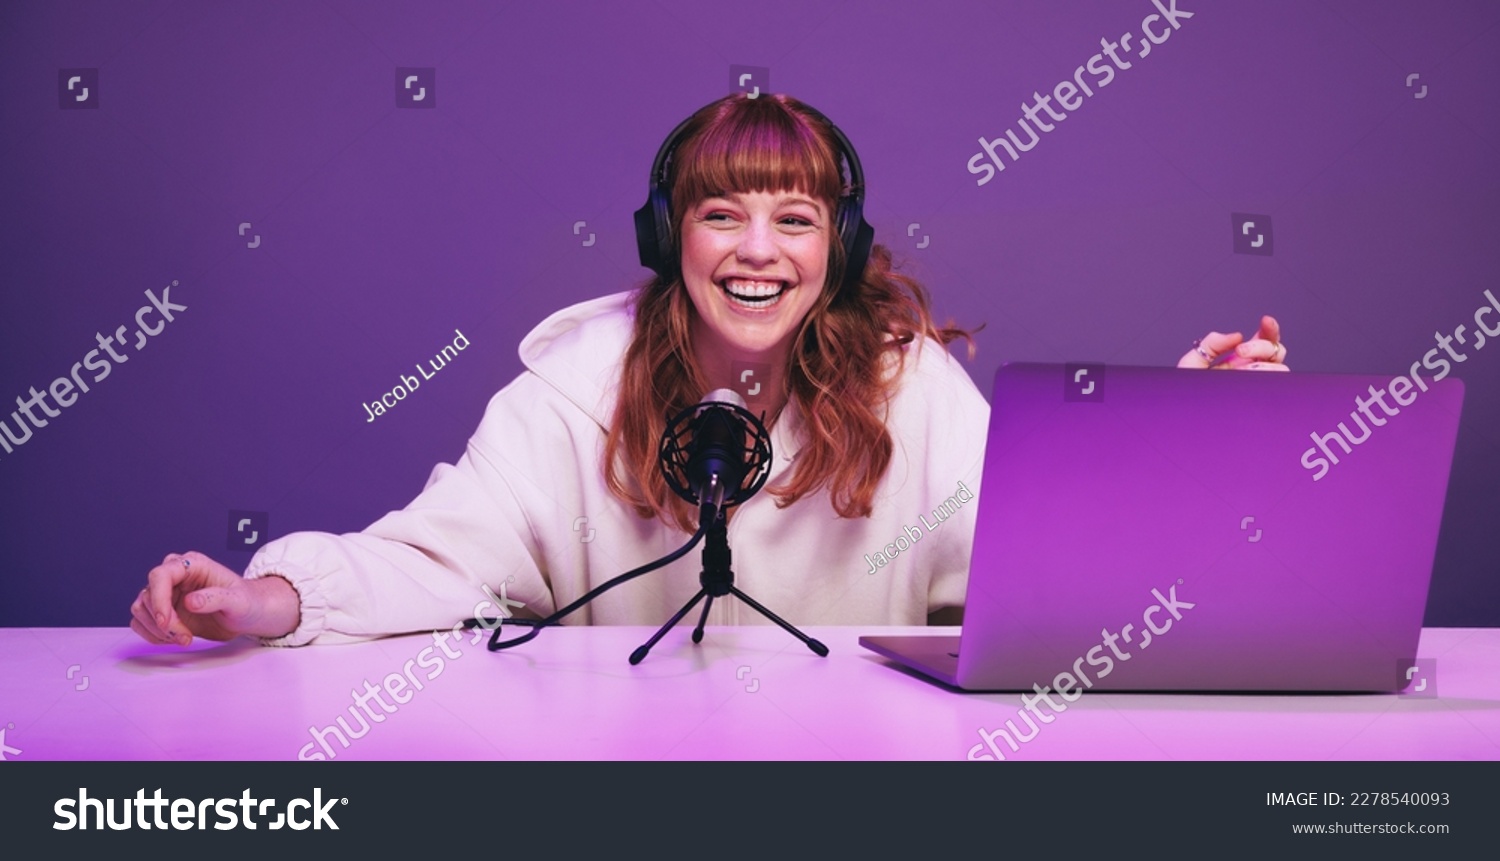 Happy young woman laughing while recording a live radio show in a studio. Cheerful young woman hosting an audio broadcast in neon purple light. Young woman creating content for her internet podcast. #2278540093